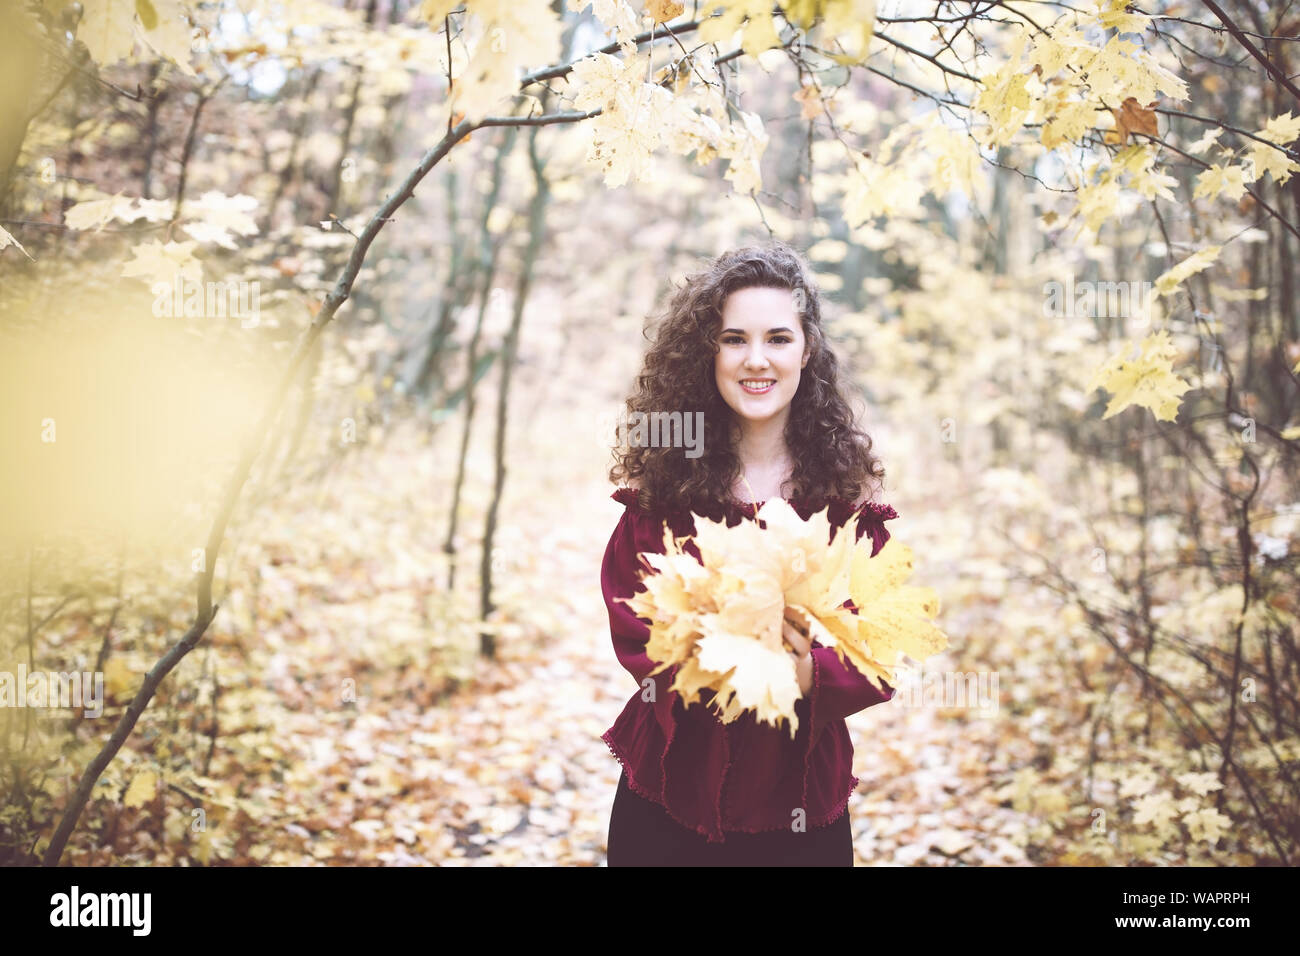 Beautiful girl with curly dark hair in a maroon top in an autumn park holding maple leaves and smiling at the camera Stock Photo